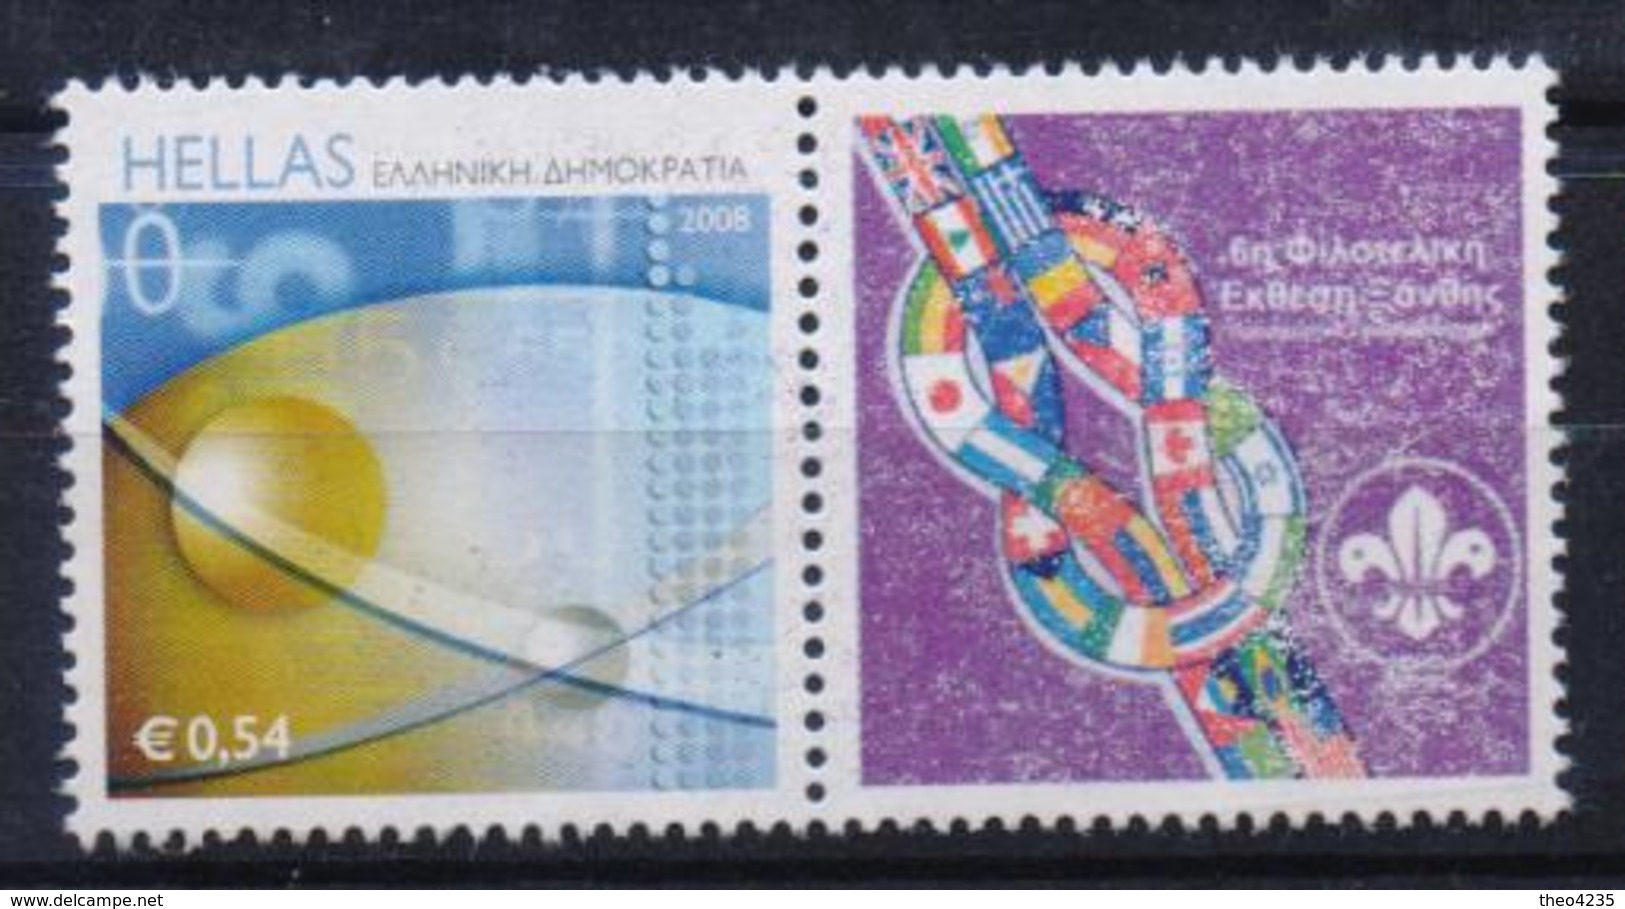 GREECE STAMPS PERSONAL STAMP WITH LABEL/6th PHILOTELIC EXHIBTION OF XANTHI CITY-2008-MNH(L5) - Nuovi